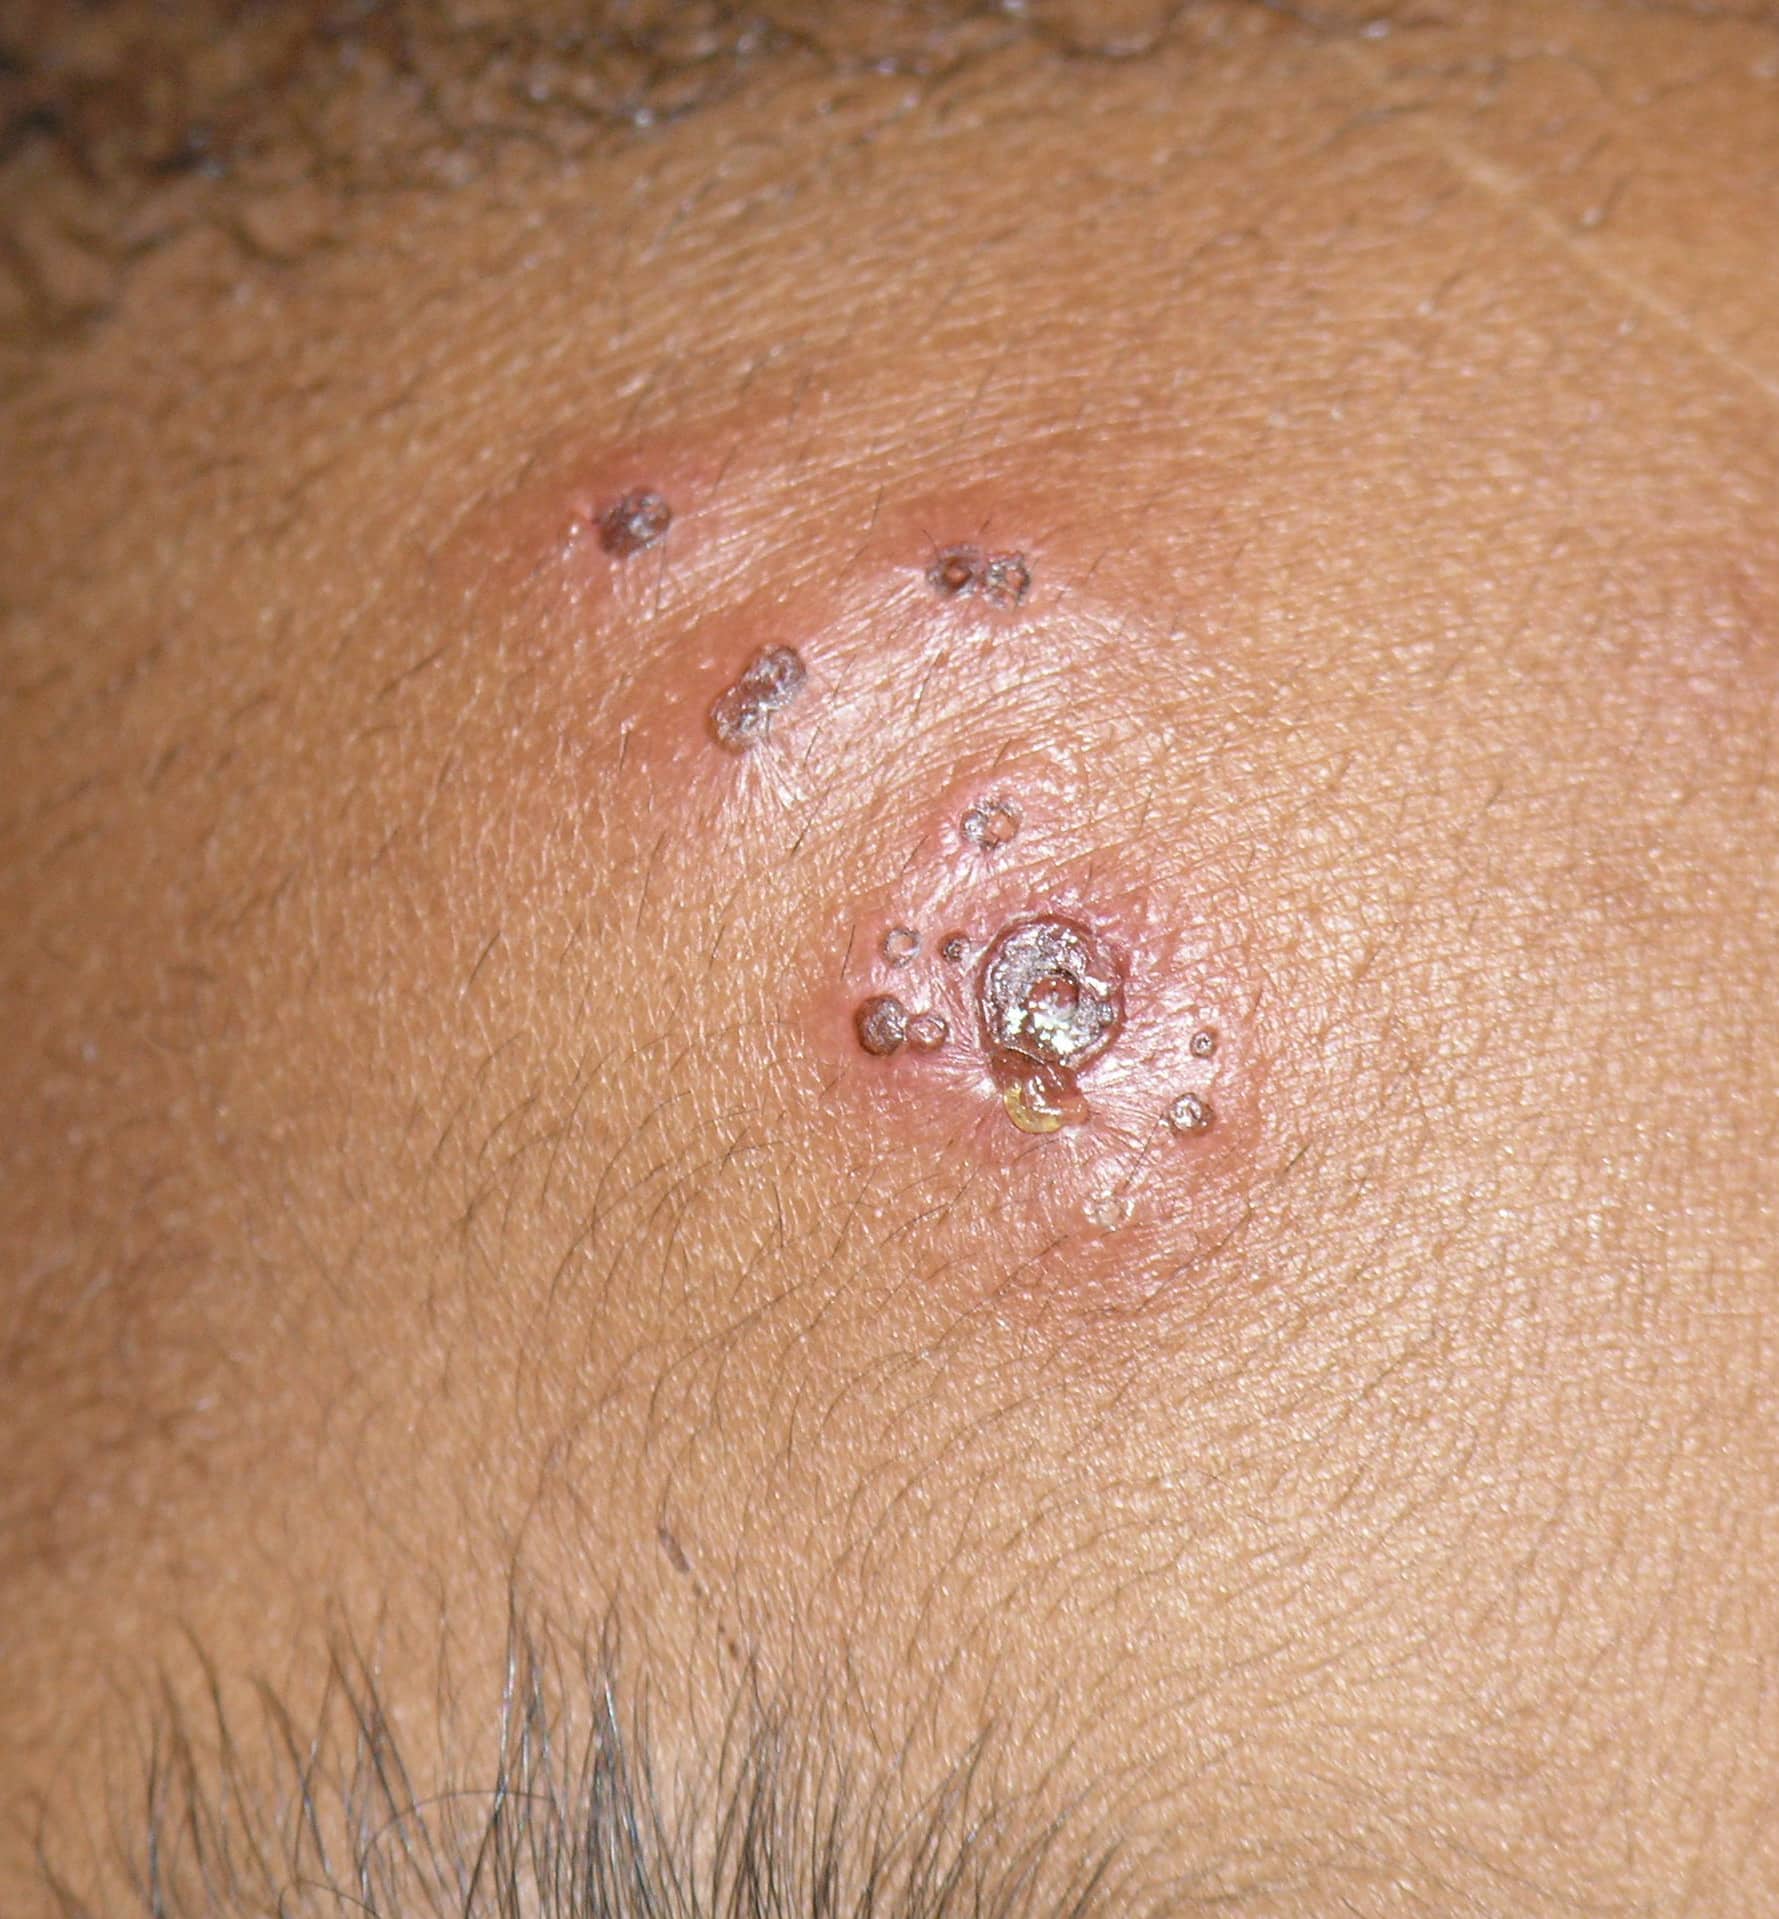 Genital Herpes simplex virus Is considered the most Common Std ...